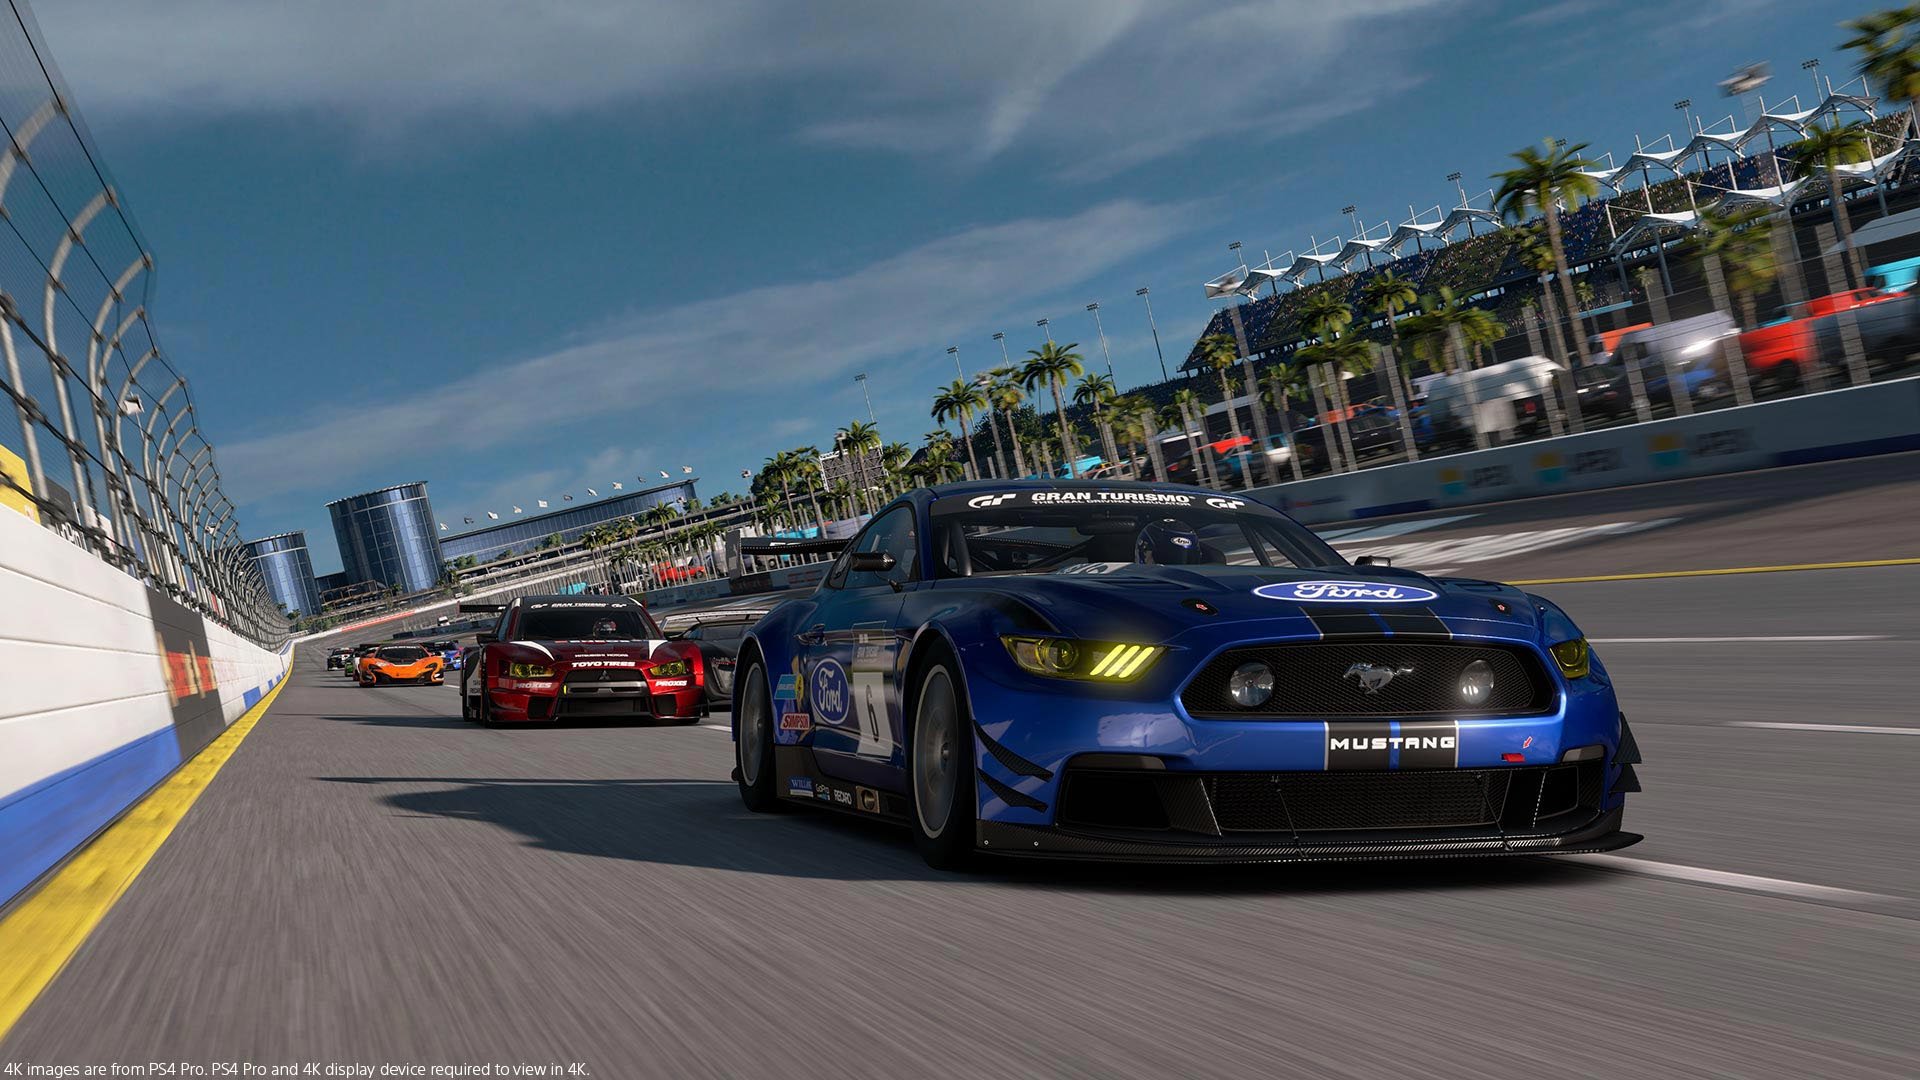 Gran Turismo 7 vs. Gran Turismo 6 and Gran Turismo Sport – 10 Differences  You Need to